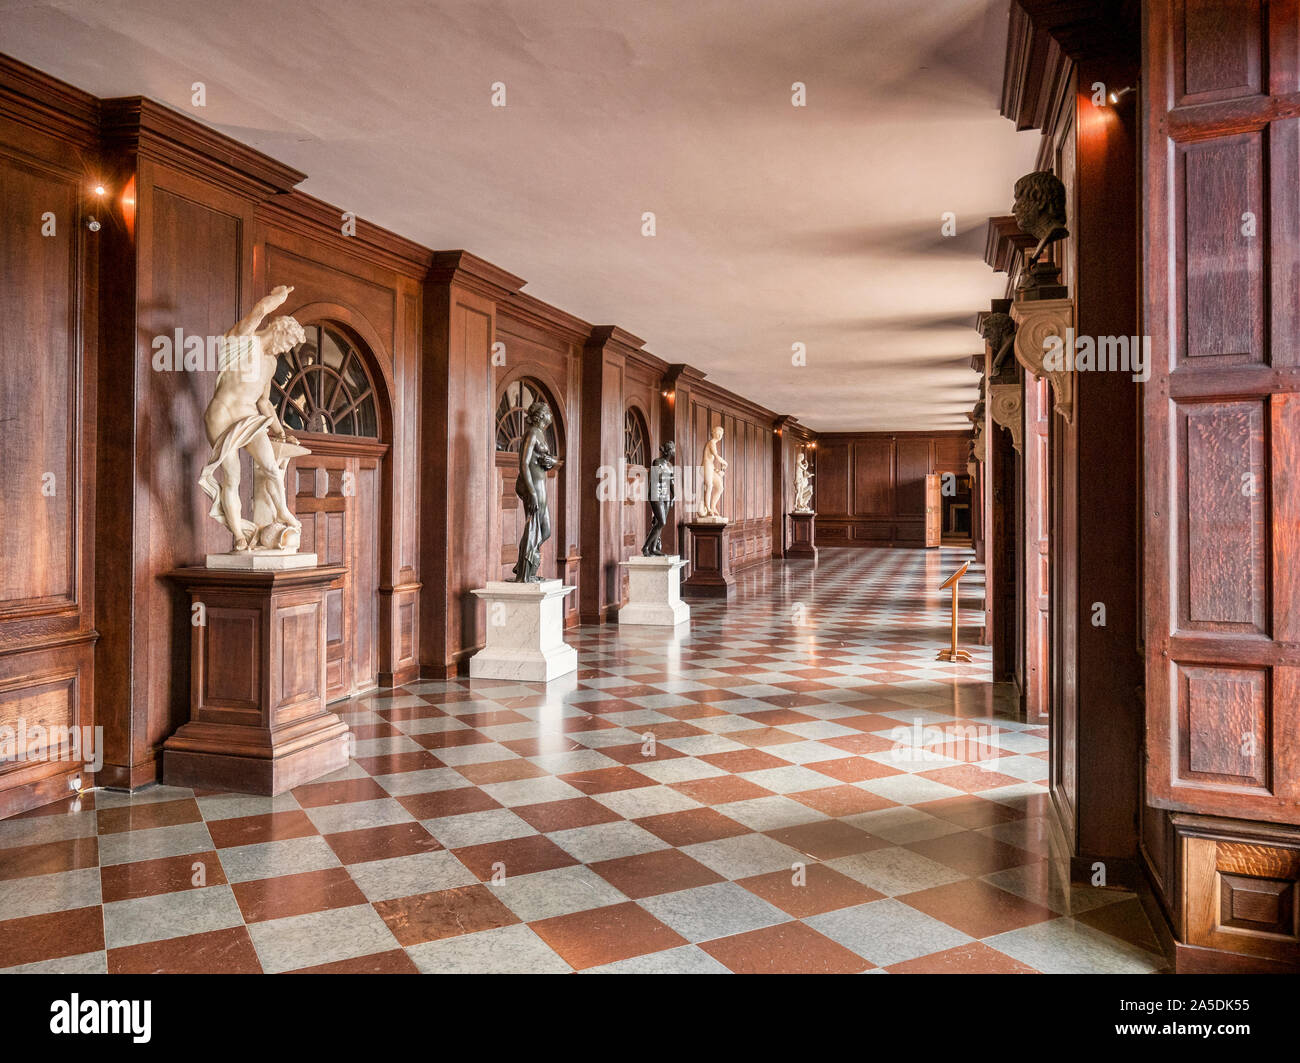 9 June 2019: Richmond upon Thames, London, UK -  The Orangery at Hampton Court Palace, the former royal residence in West London. Stock Photo